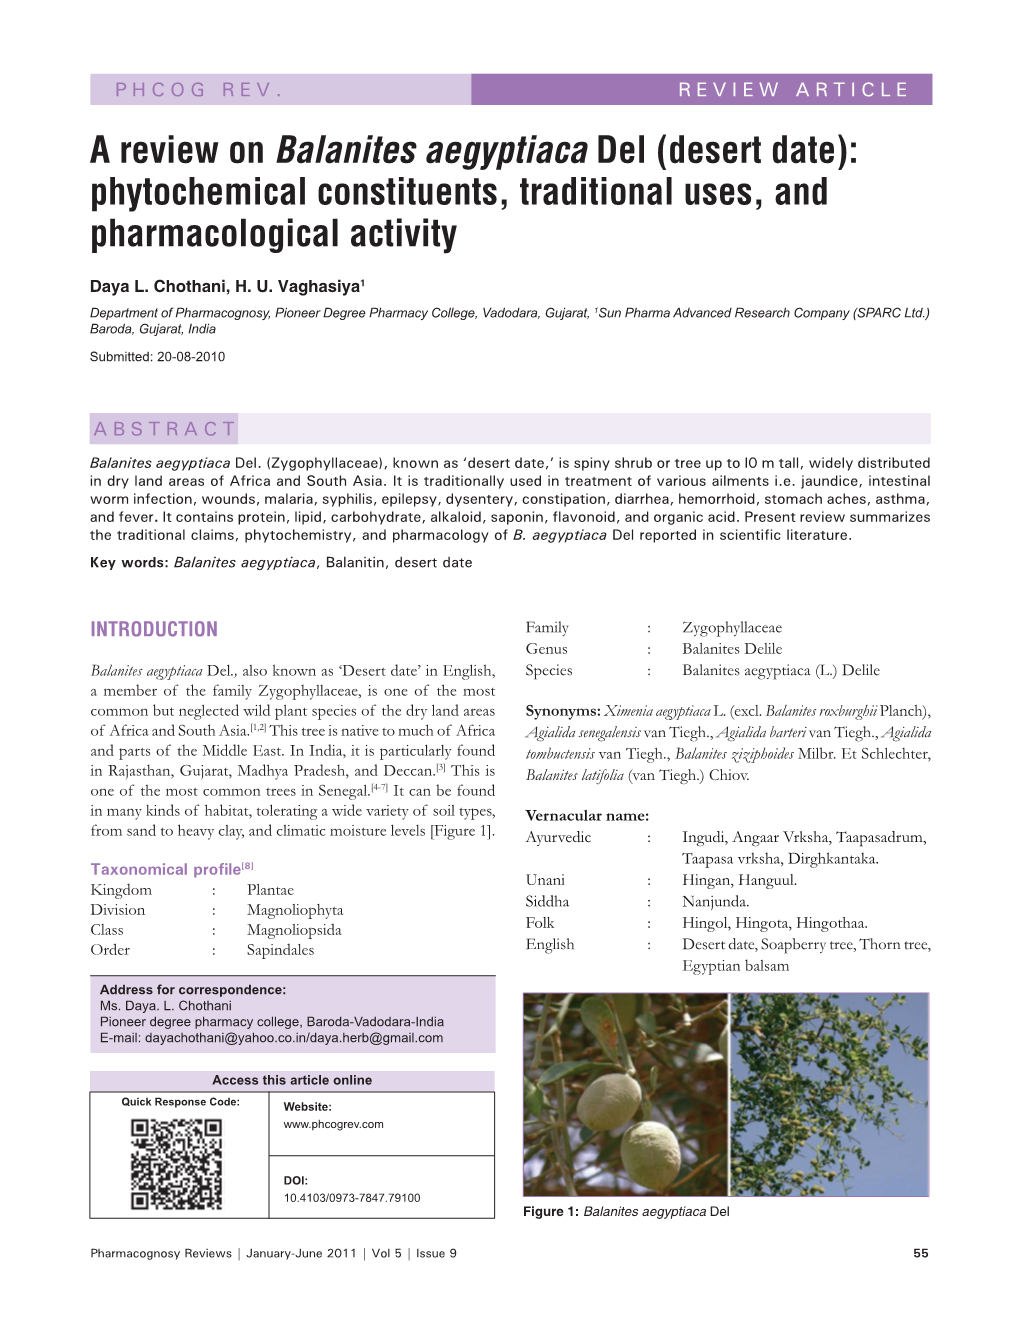 A Review on Balanites Aegyptiaca Del (Desert Date): Phytochemical Constituents, Traditional Uses, and Pharmacological Activity